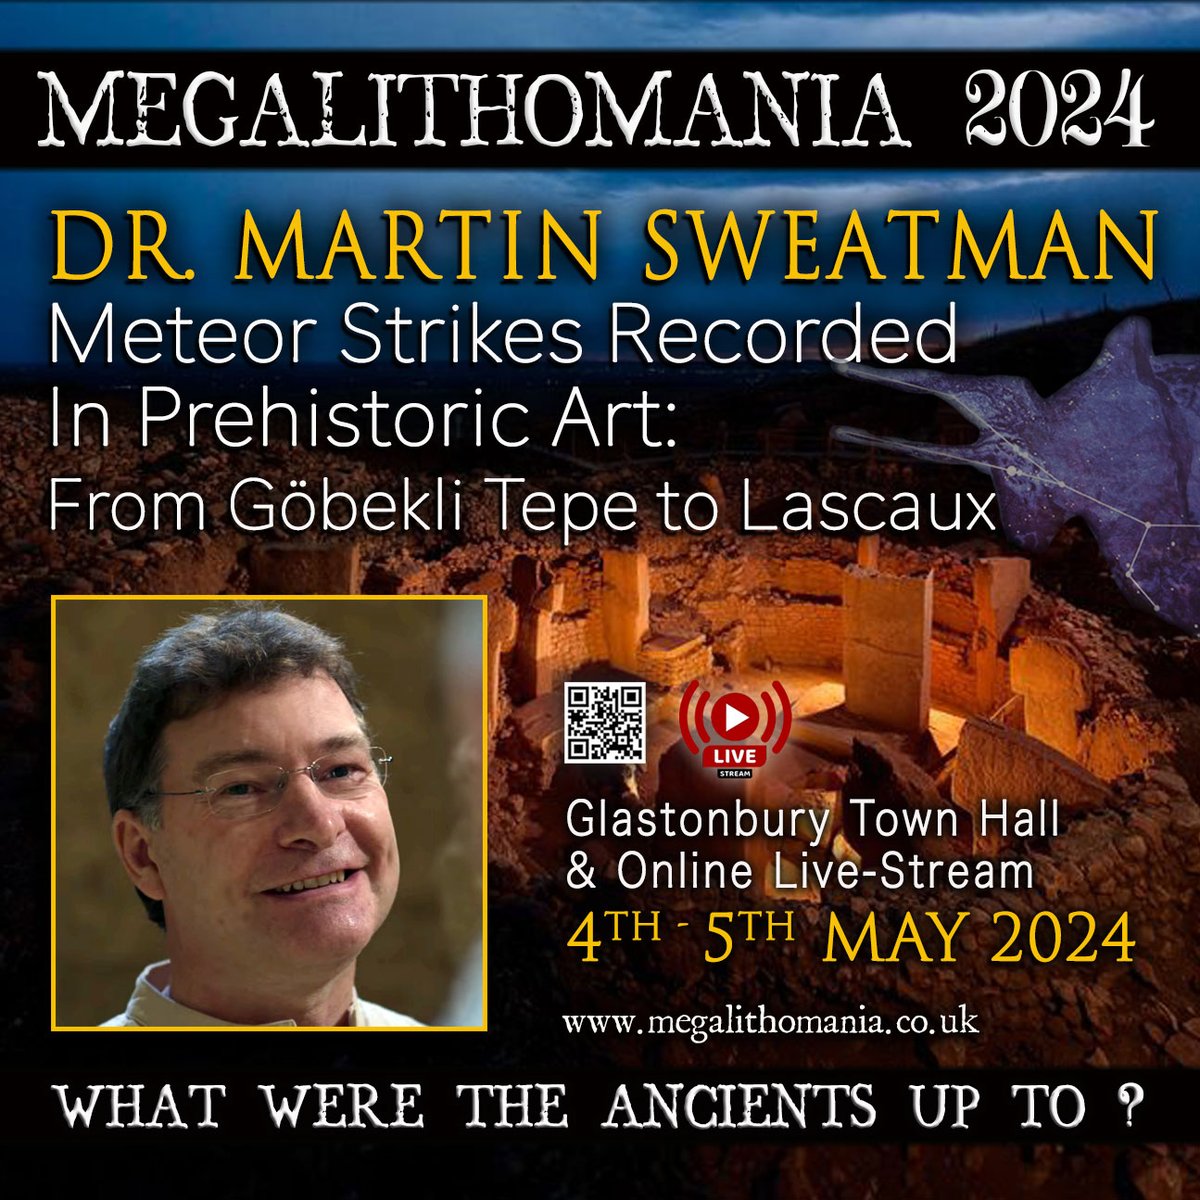 MARTIN SWEATMAN - Meteor Strikes Recorded in Prehistoric Art: From Göbekli Tepe to Lascaux, lecture at the Megalithomania Conference 2024 at the Glastonbury Town Hall, UK on 4th - 5th May + live-stream. megalithomania.co.uk/booking.html #megalithomania #conference #megaliths #Glastonbury